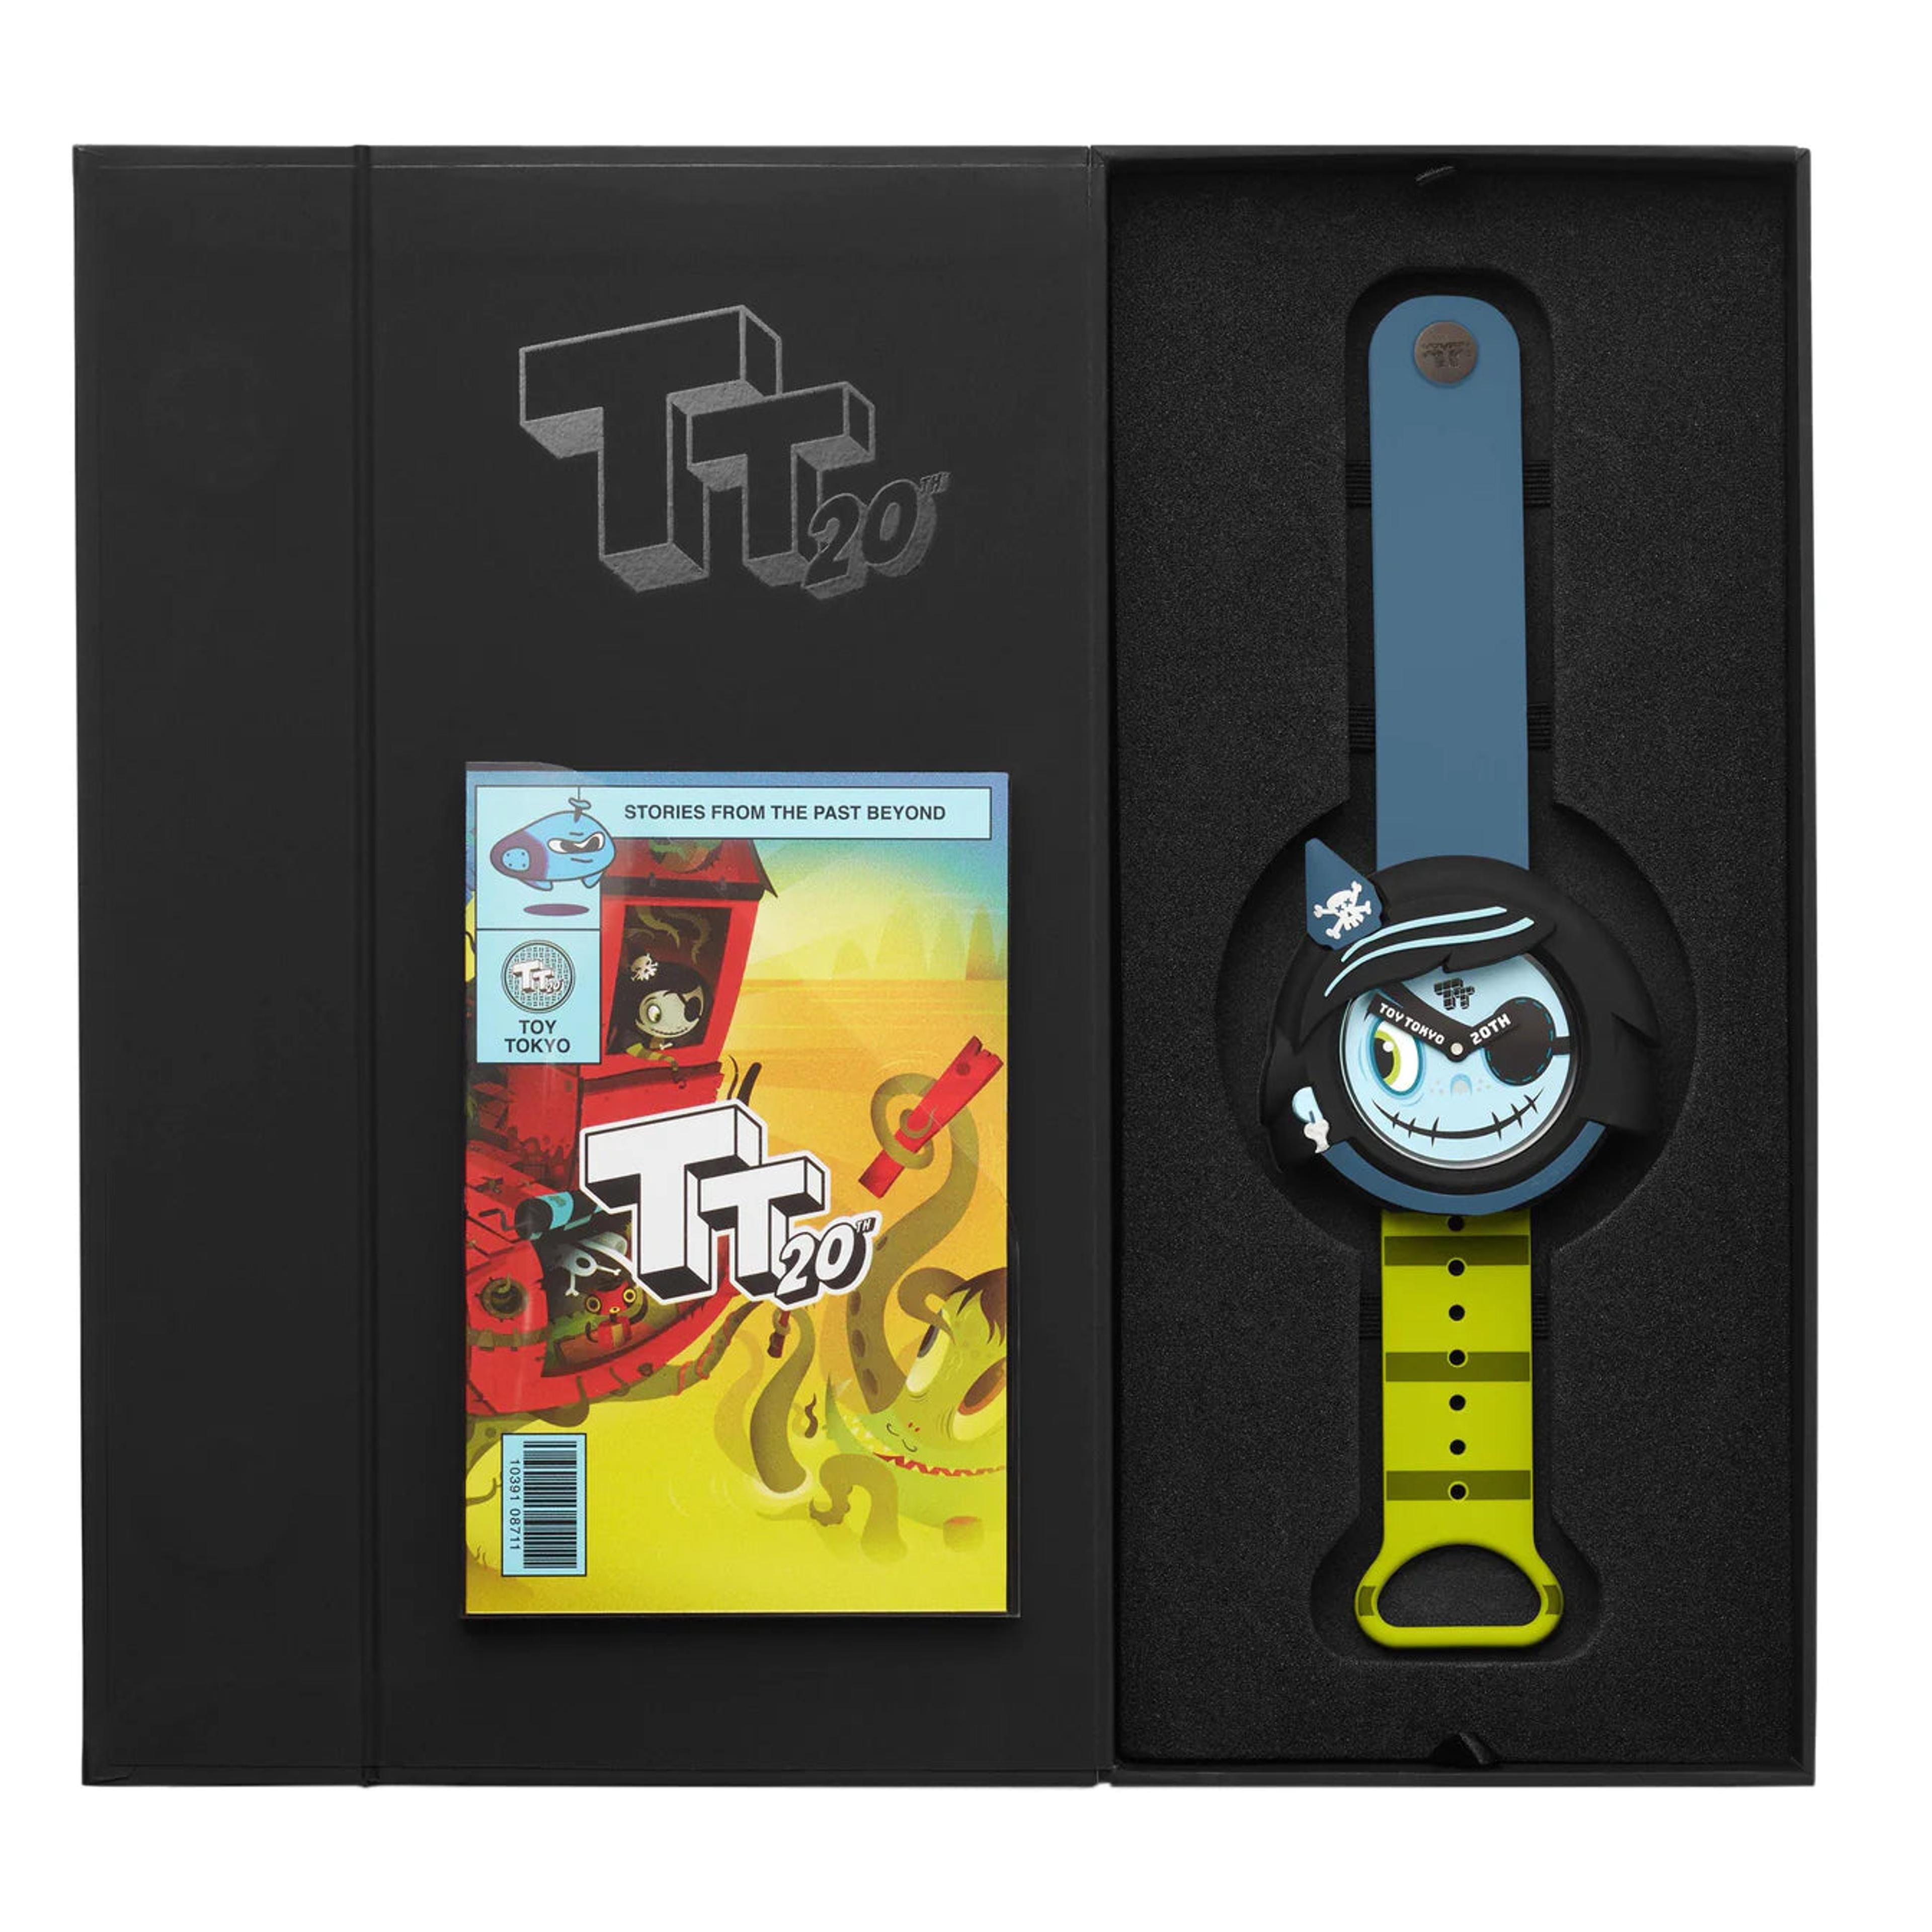 NTWRK - Toy Toyko 20th Anniversary Watches - Quiccs, Ron English 